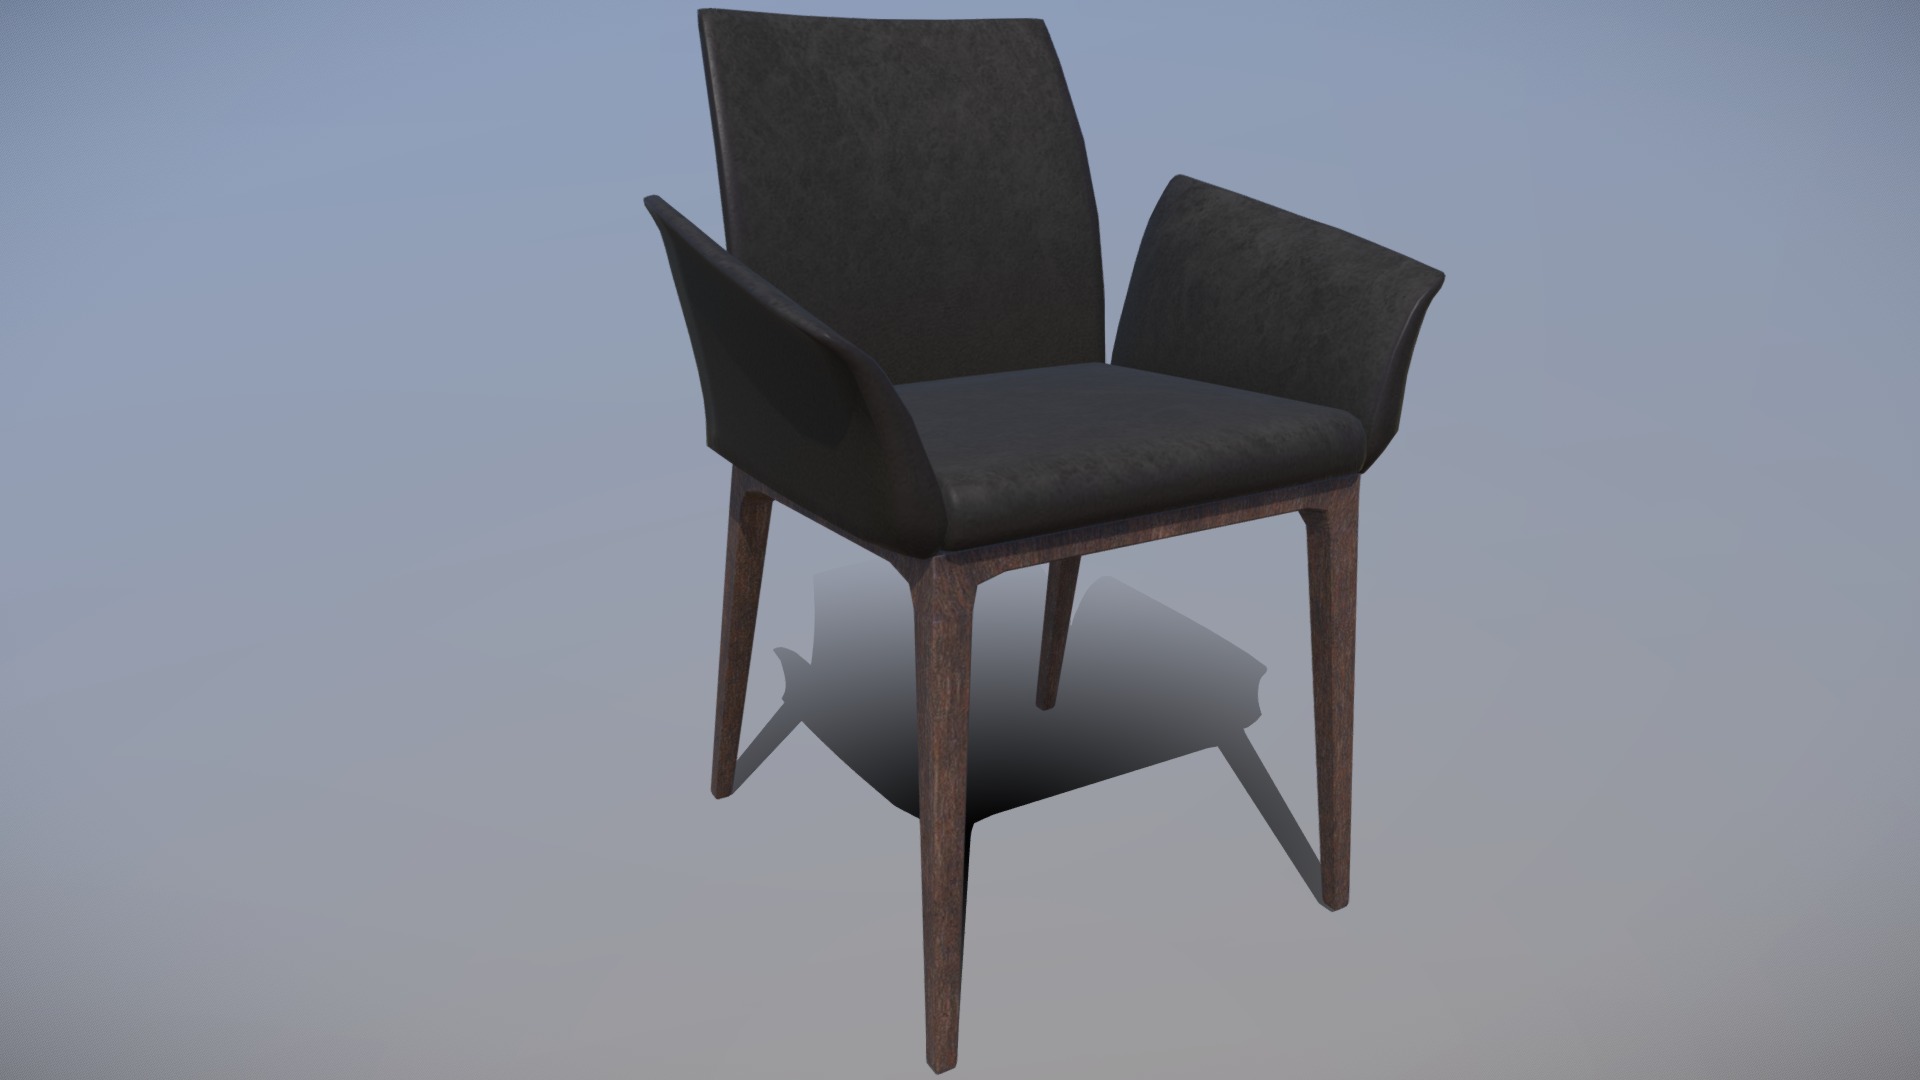 3D model Bronw Leather Chair 3dsmax lowpoly - This is a 3D model of the Bronw Leather Chair 3dsmax lowpoly. The 3D model is about a chair with a cushion.